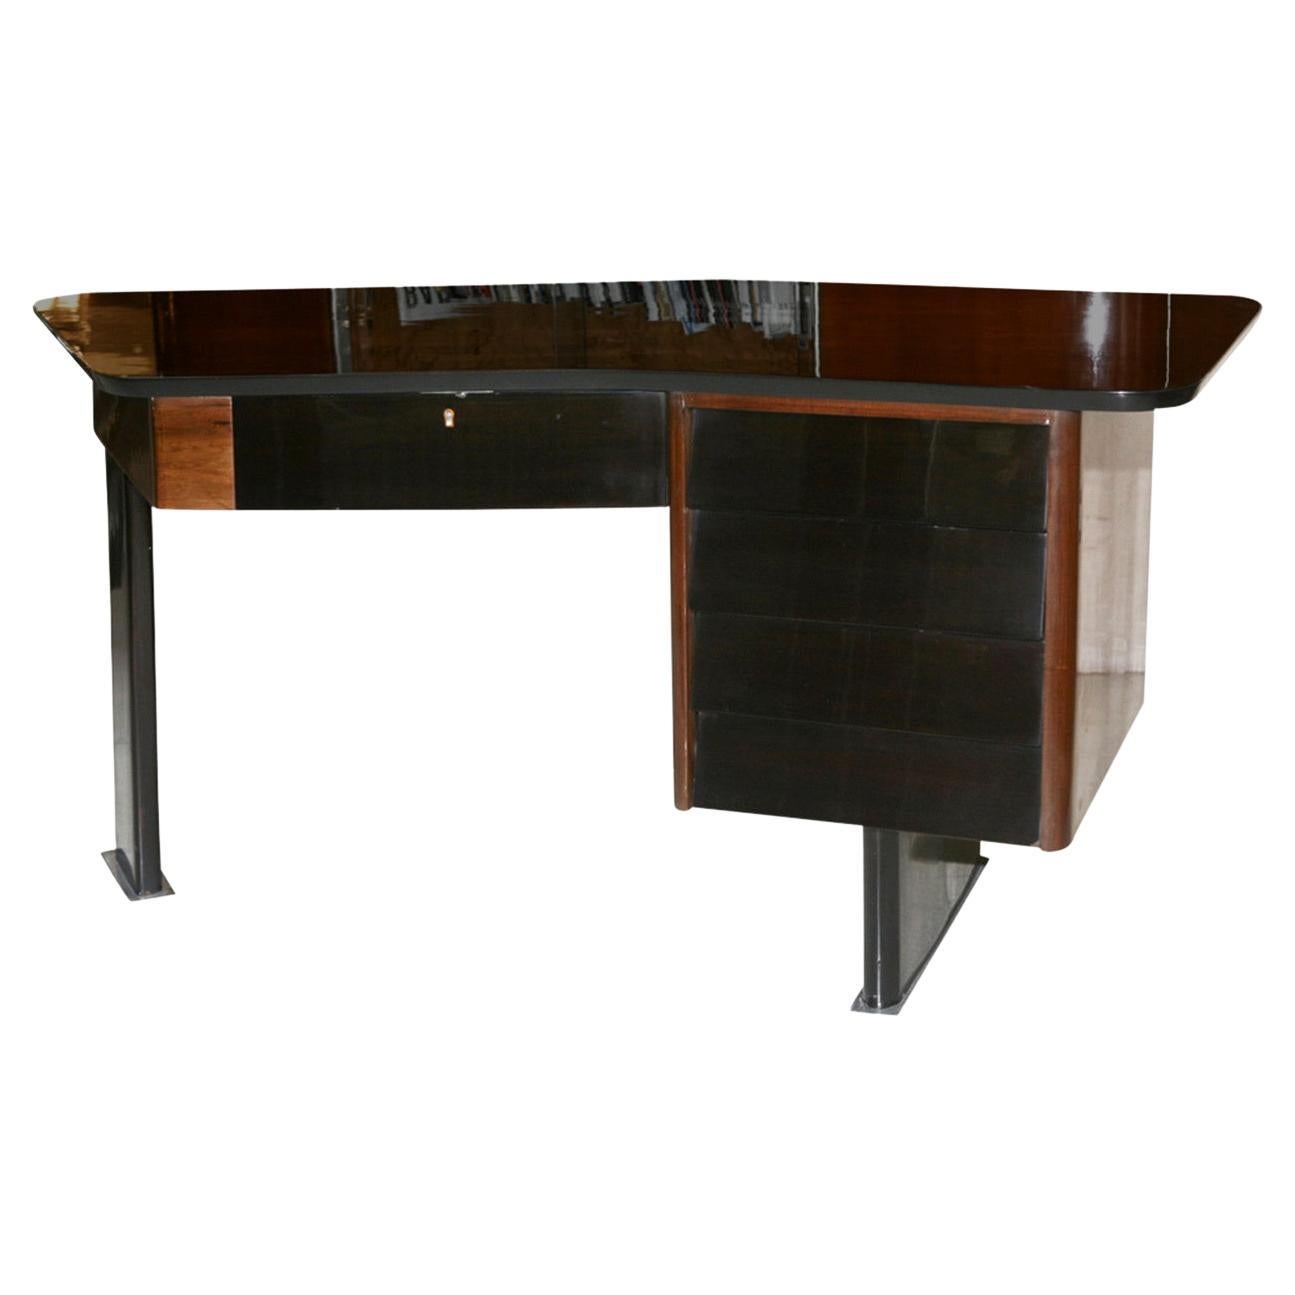 Desk Art Deco in Wood from France 1920 " Free Shipping in Florida " For Sale